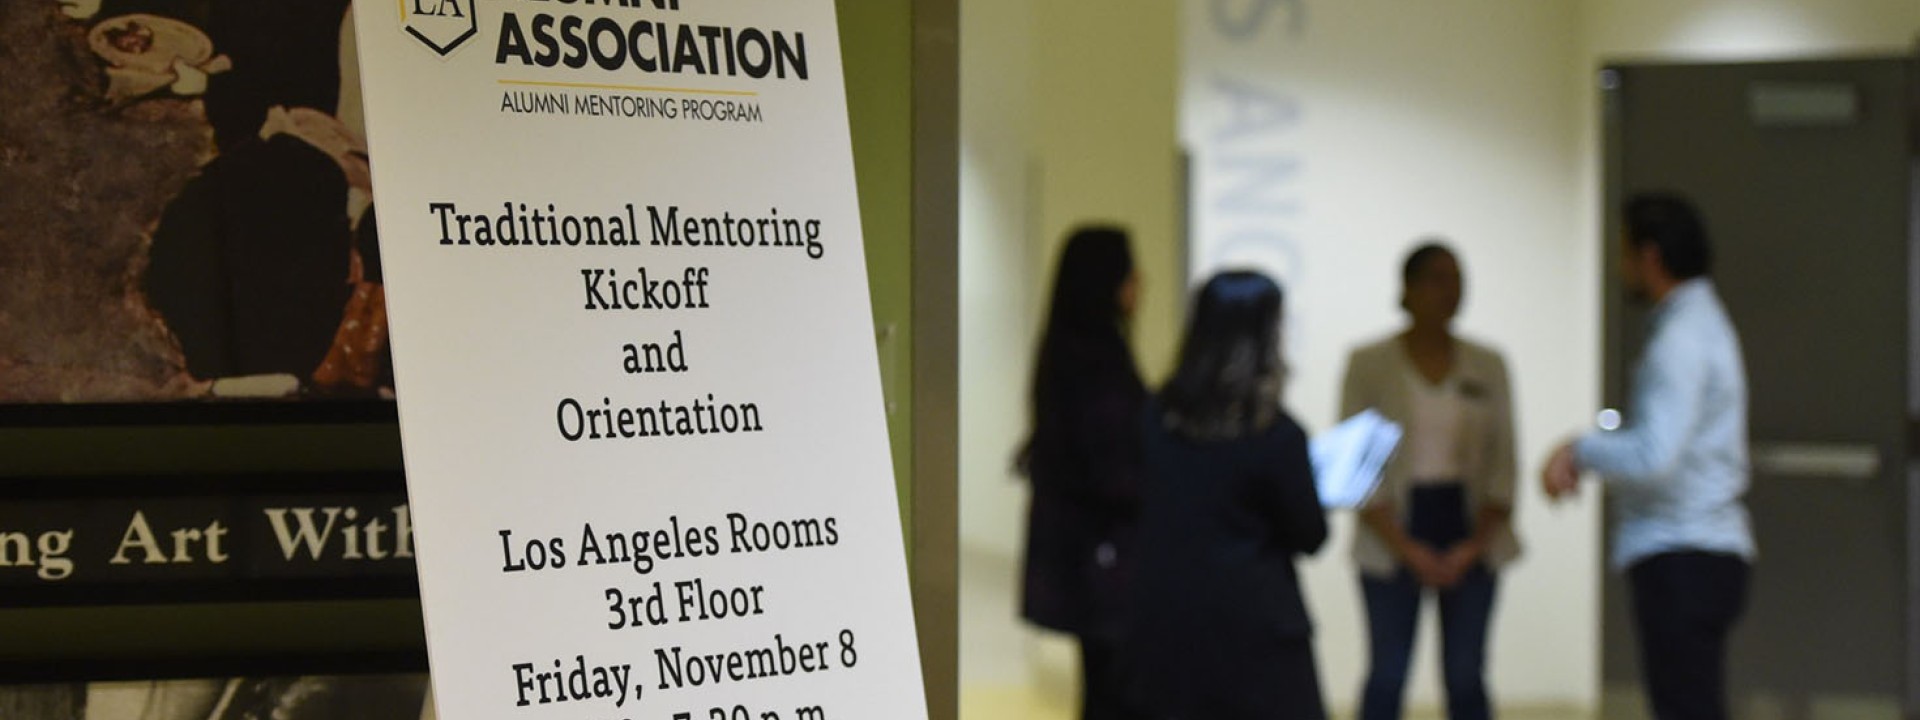 Sign for mentoring orientation with a group of people chatting in the background